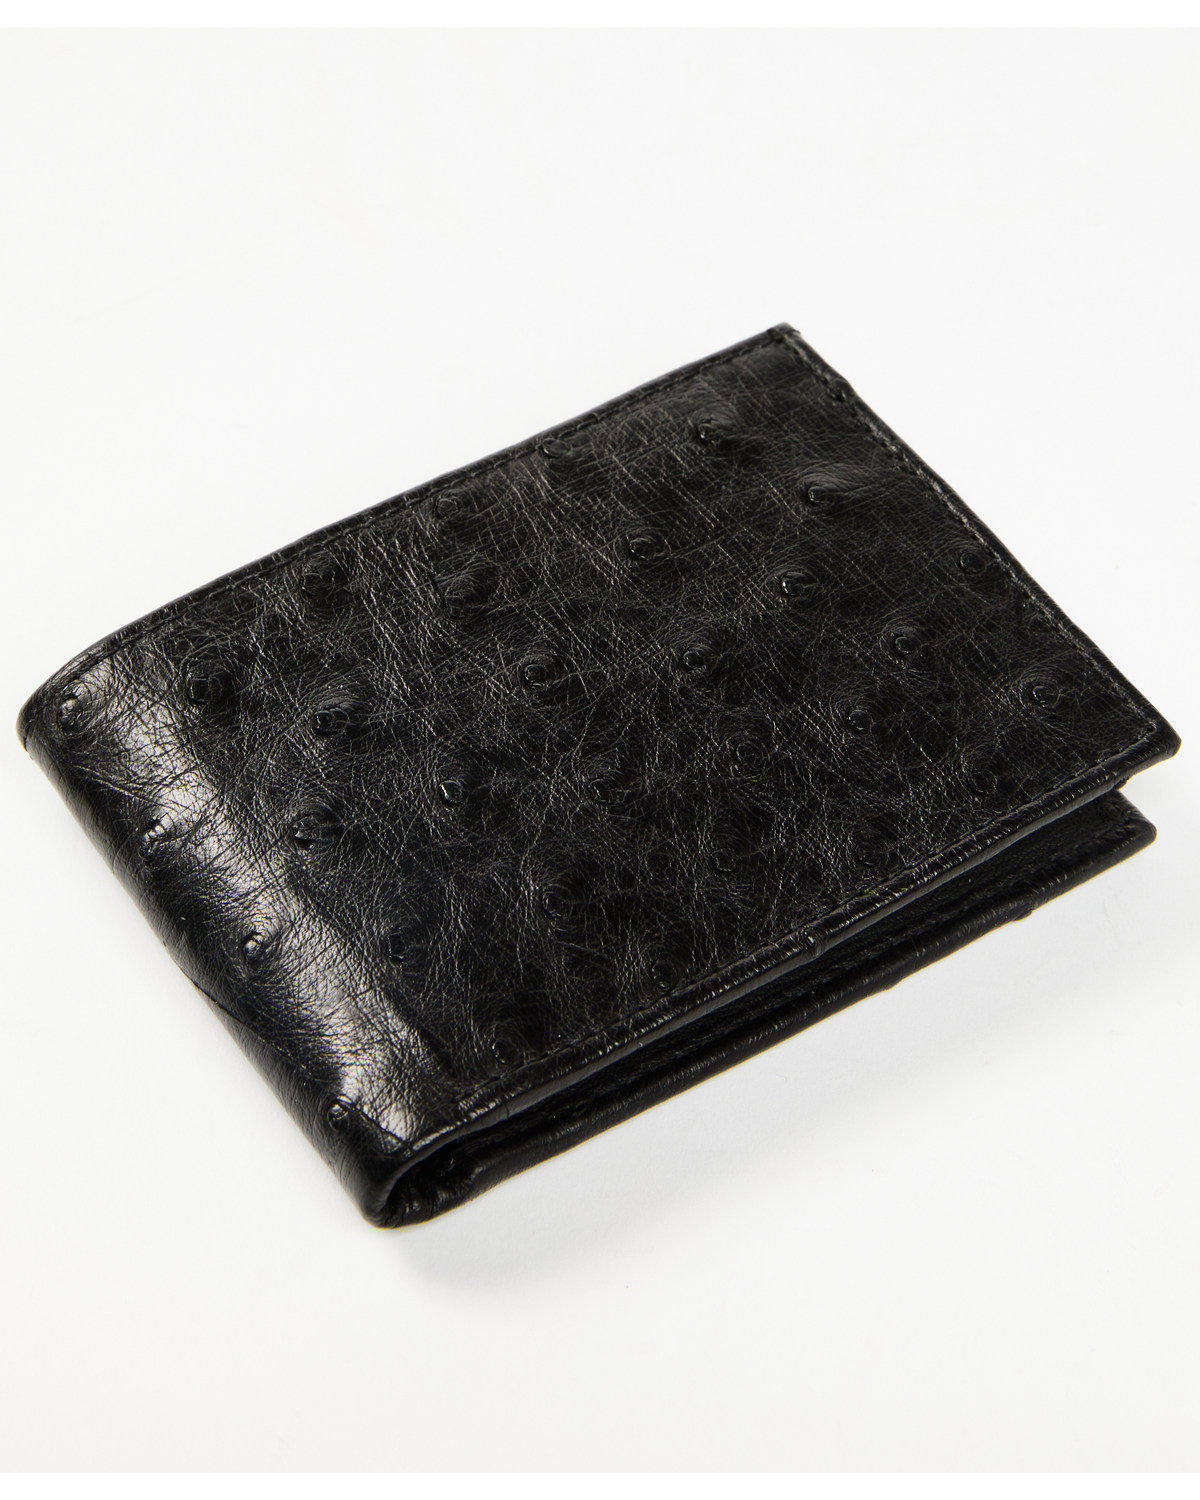 Cody James Men's Exotic Ostrich Leather Bifold Wallet